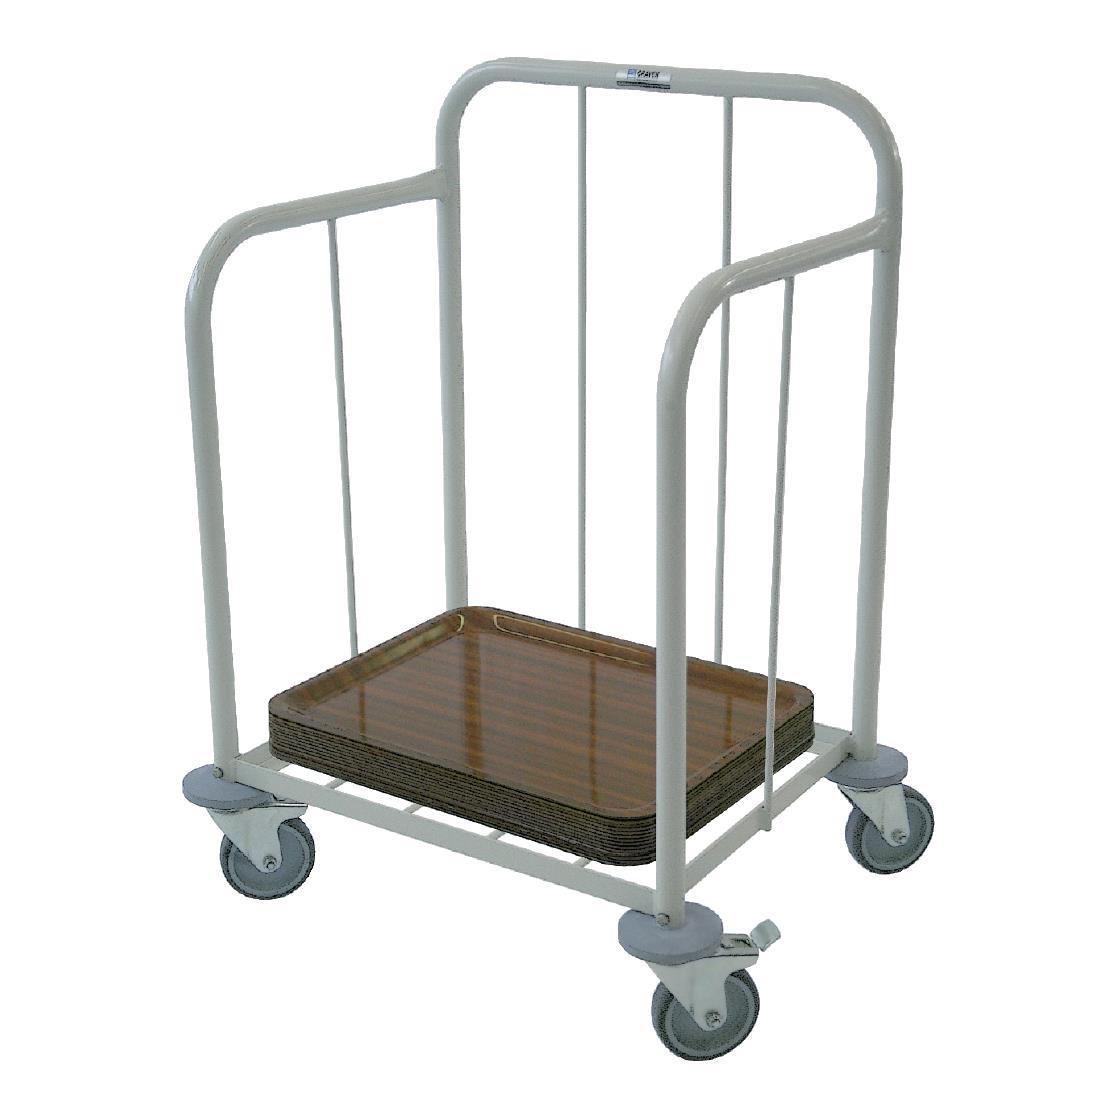 Craven Steel Tray Stacking Trolley - P102  - 1